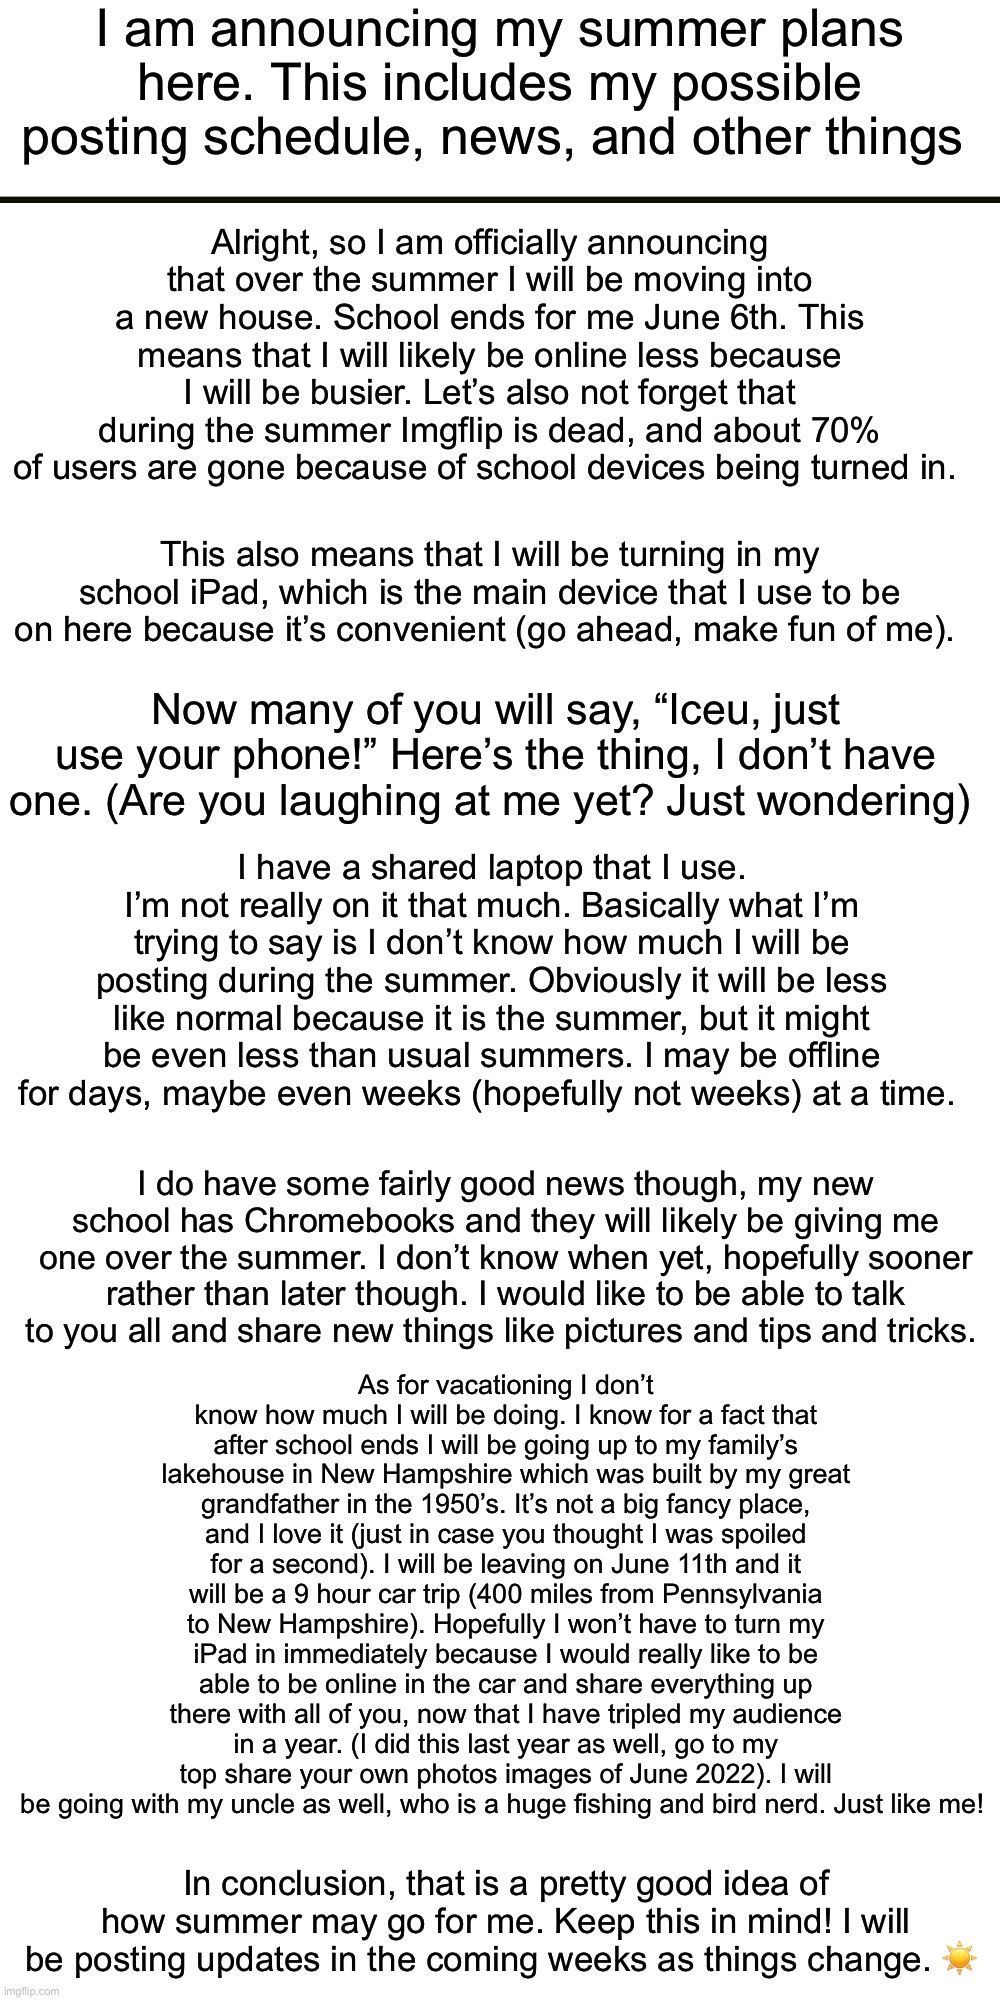 Update #1 for Summertime (clarification, I’m not leaving for summer, just online a bit less) | I am announcing my summer plans here. This includes my possible posting schedule, news, and other things; Alright, so I am officially announcing that over the summer I will be moving into a new house. School ends for me June 6th. This means that I will likely be online less because I will be busier. Let’s also not forget that during the summer Imgflip is dead, and about 70% of users are gone because of school devices being turned in. This also means that I will be turning in my school iPad, which is the main device that I use to be on here because it’s convenient (go ahead, make fun of me). Now many of you will say, “Iceu, just use your phone!” Here’s the thing, I don’t have one. (Are you laughing at me yet? Just wondering); I have a shared laptop that I use. I’m not really on it that much. Basically what I’m trying to say is I don’t know how much I will be posting during the summer. Obviously it will be less like normal because it is the summer, but it might be even less than usual summers. I may be offline for days, maybe even weeks (hopefully not weeks) at a time. I do have some fairly good news though, my new school has Chromebooks and they will likely be giving me one over the summer. I don’t know when yet, hopefully sooner rather than later though. I would like to be able to talk to you all and share new things like pictures and tips and tricks. As for vacationing I don’t know how much I will be doing. I know for a fact that after school ends I will be going up to my family’s lakehouse in New Hampshire which was built by my great grandfather in the 1950’s. It’s not a big fancy place, and I love it (just in case you thought I was spoiled for a second). I will be leaving on June 11th and it will be a 9 hour car trip (400 miles from Pennsylvania to New Hampshire). Hopefully I won’t have to turn my iPad in immediately because I would really like to be able to be online in the car and share everything up there with all of you, now that I have tripled my audience in a year. (I did this last year as well, go to my top share your own photos images of June 2022). I will be going with my uncle as well, who is a huge fishing and bird nerd. Just like me! In conclusion, that is a pretty good idea of how summer may go for me. Keep this in mind! I will be posting updates in the coming weeks as things change. ☀️ | image tagged in summer,posting,iceu,summer posting schedule and other things | made w/ Imgflip meme maker